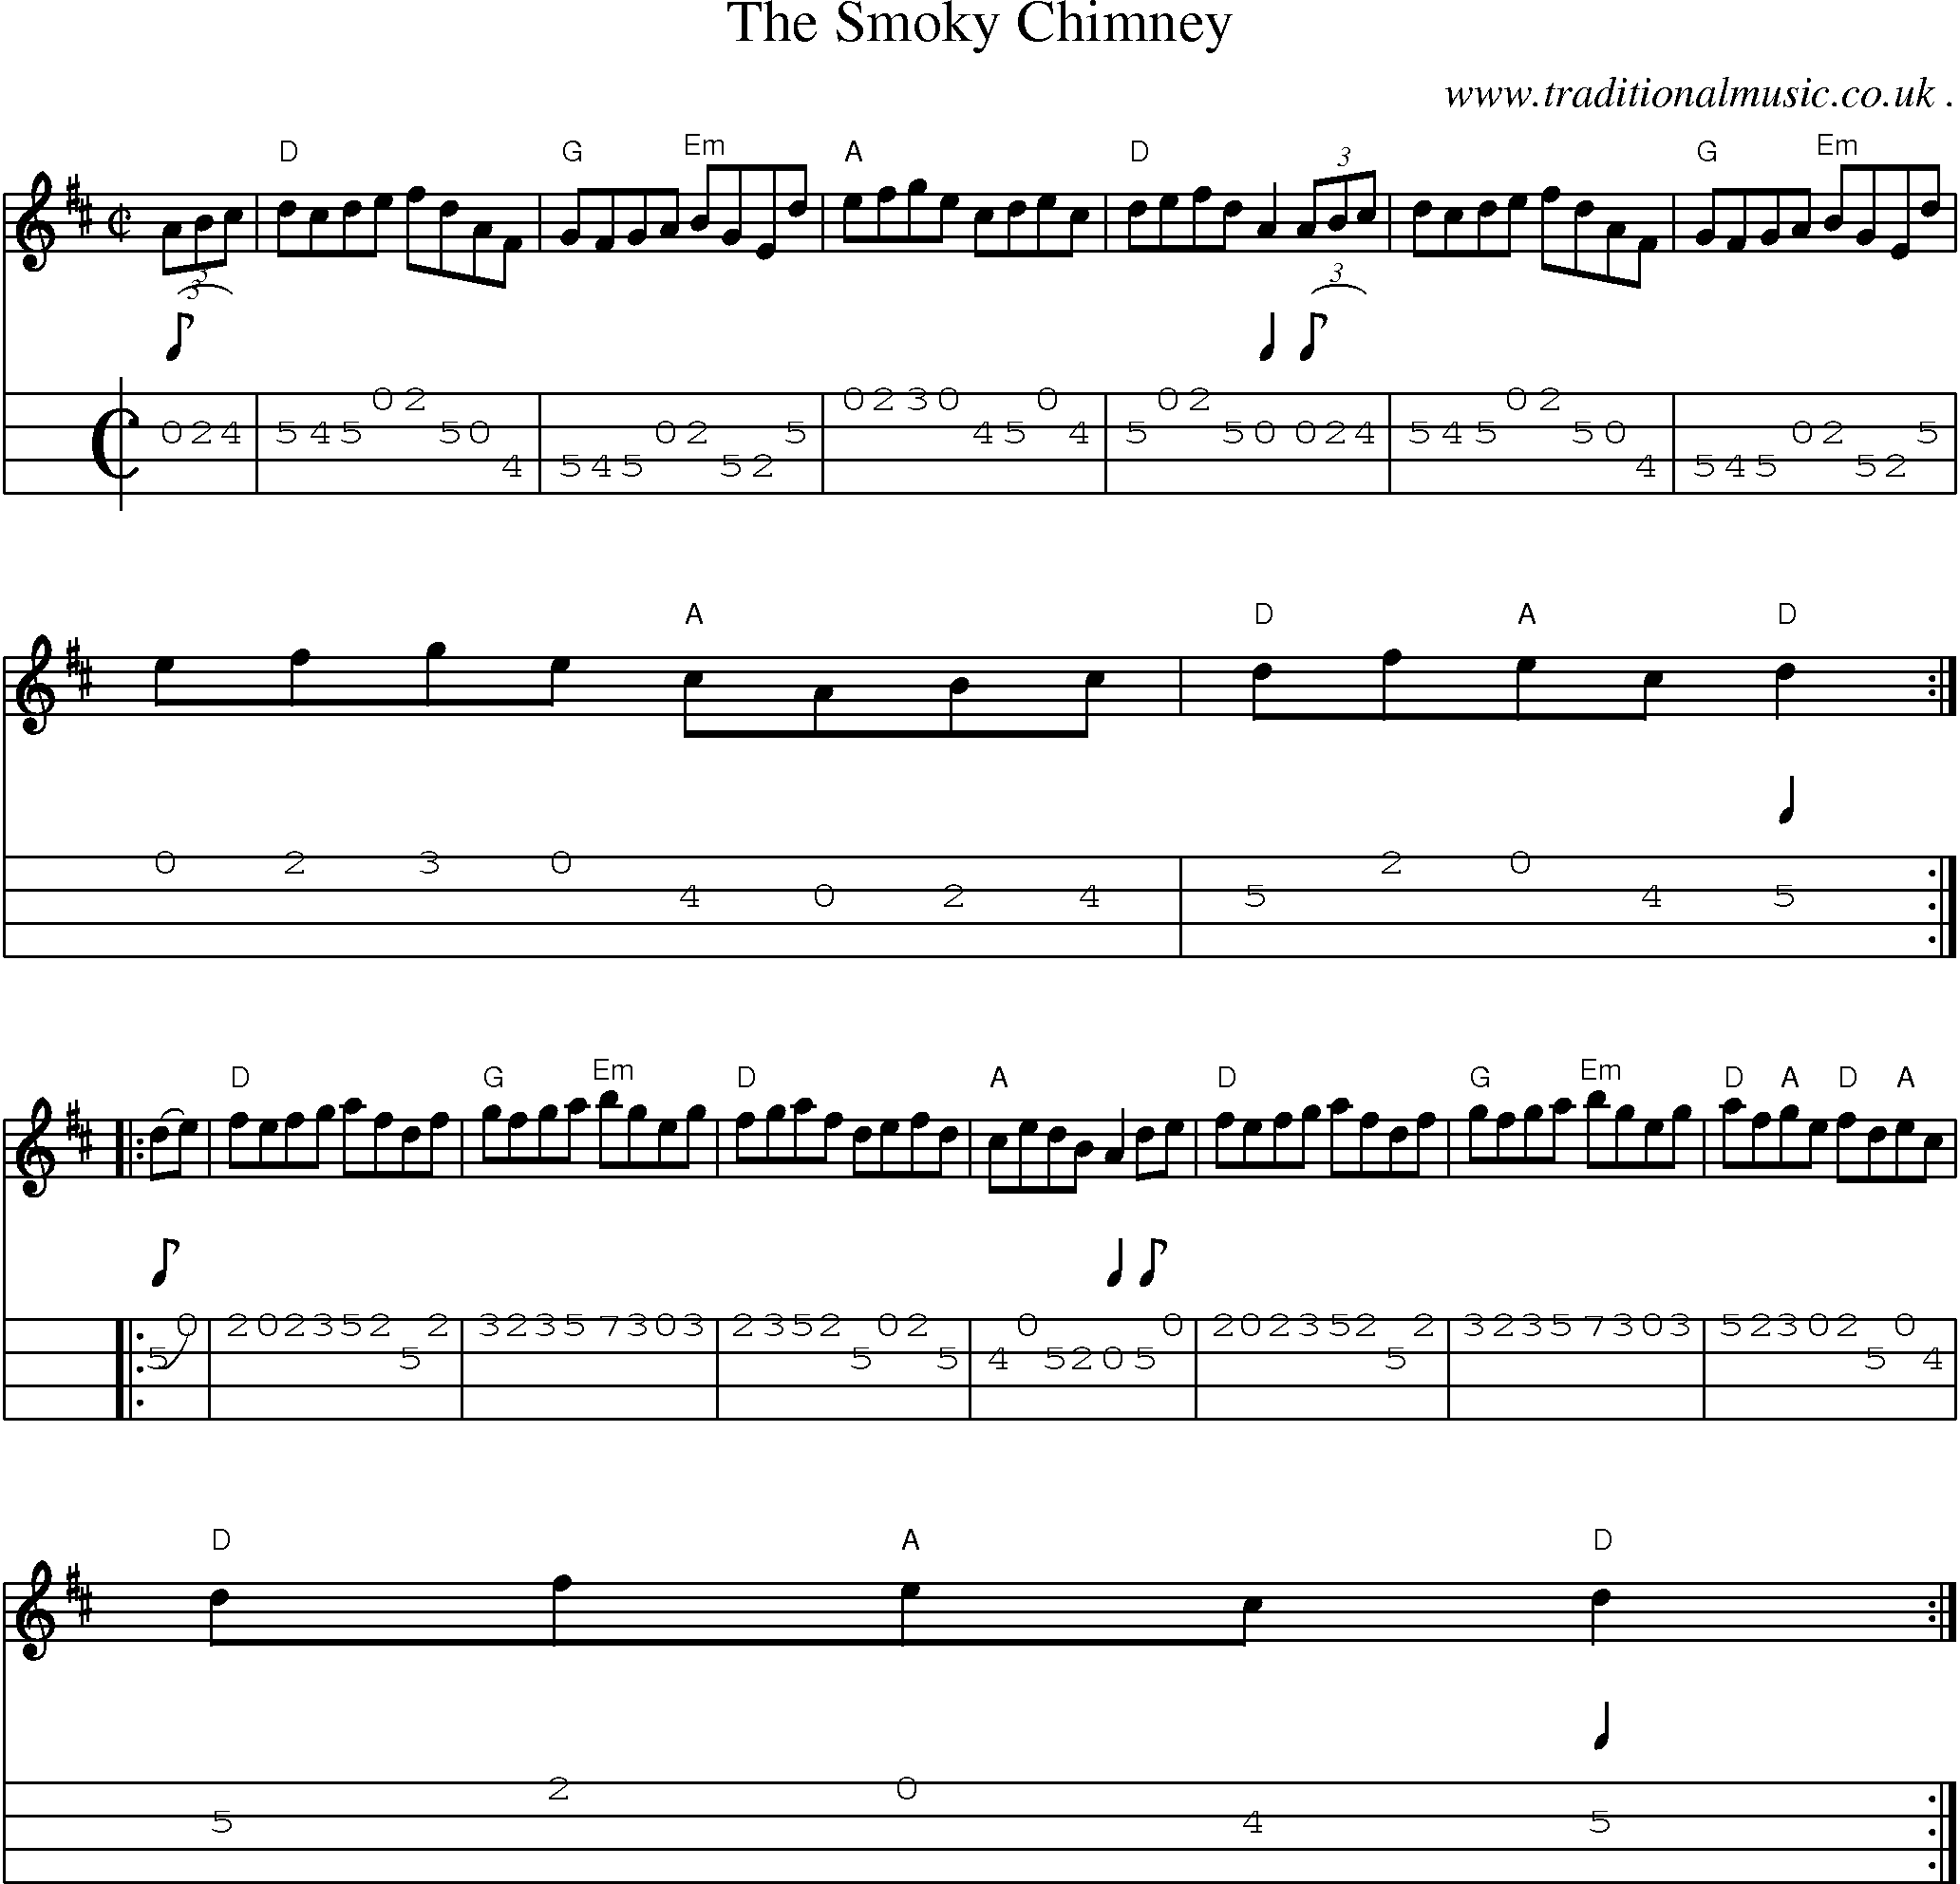 Music Score and Guitar Tabs for The Smoky Chimney